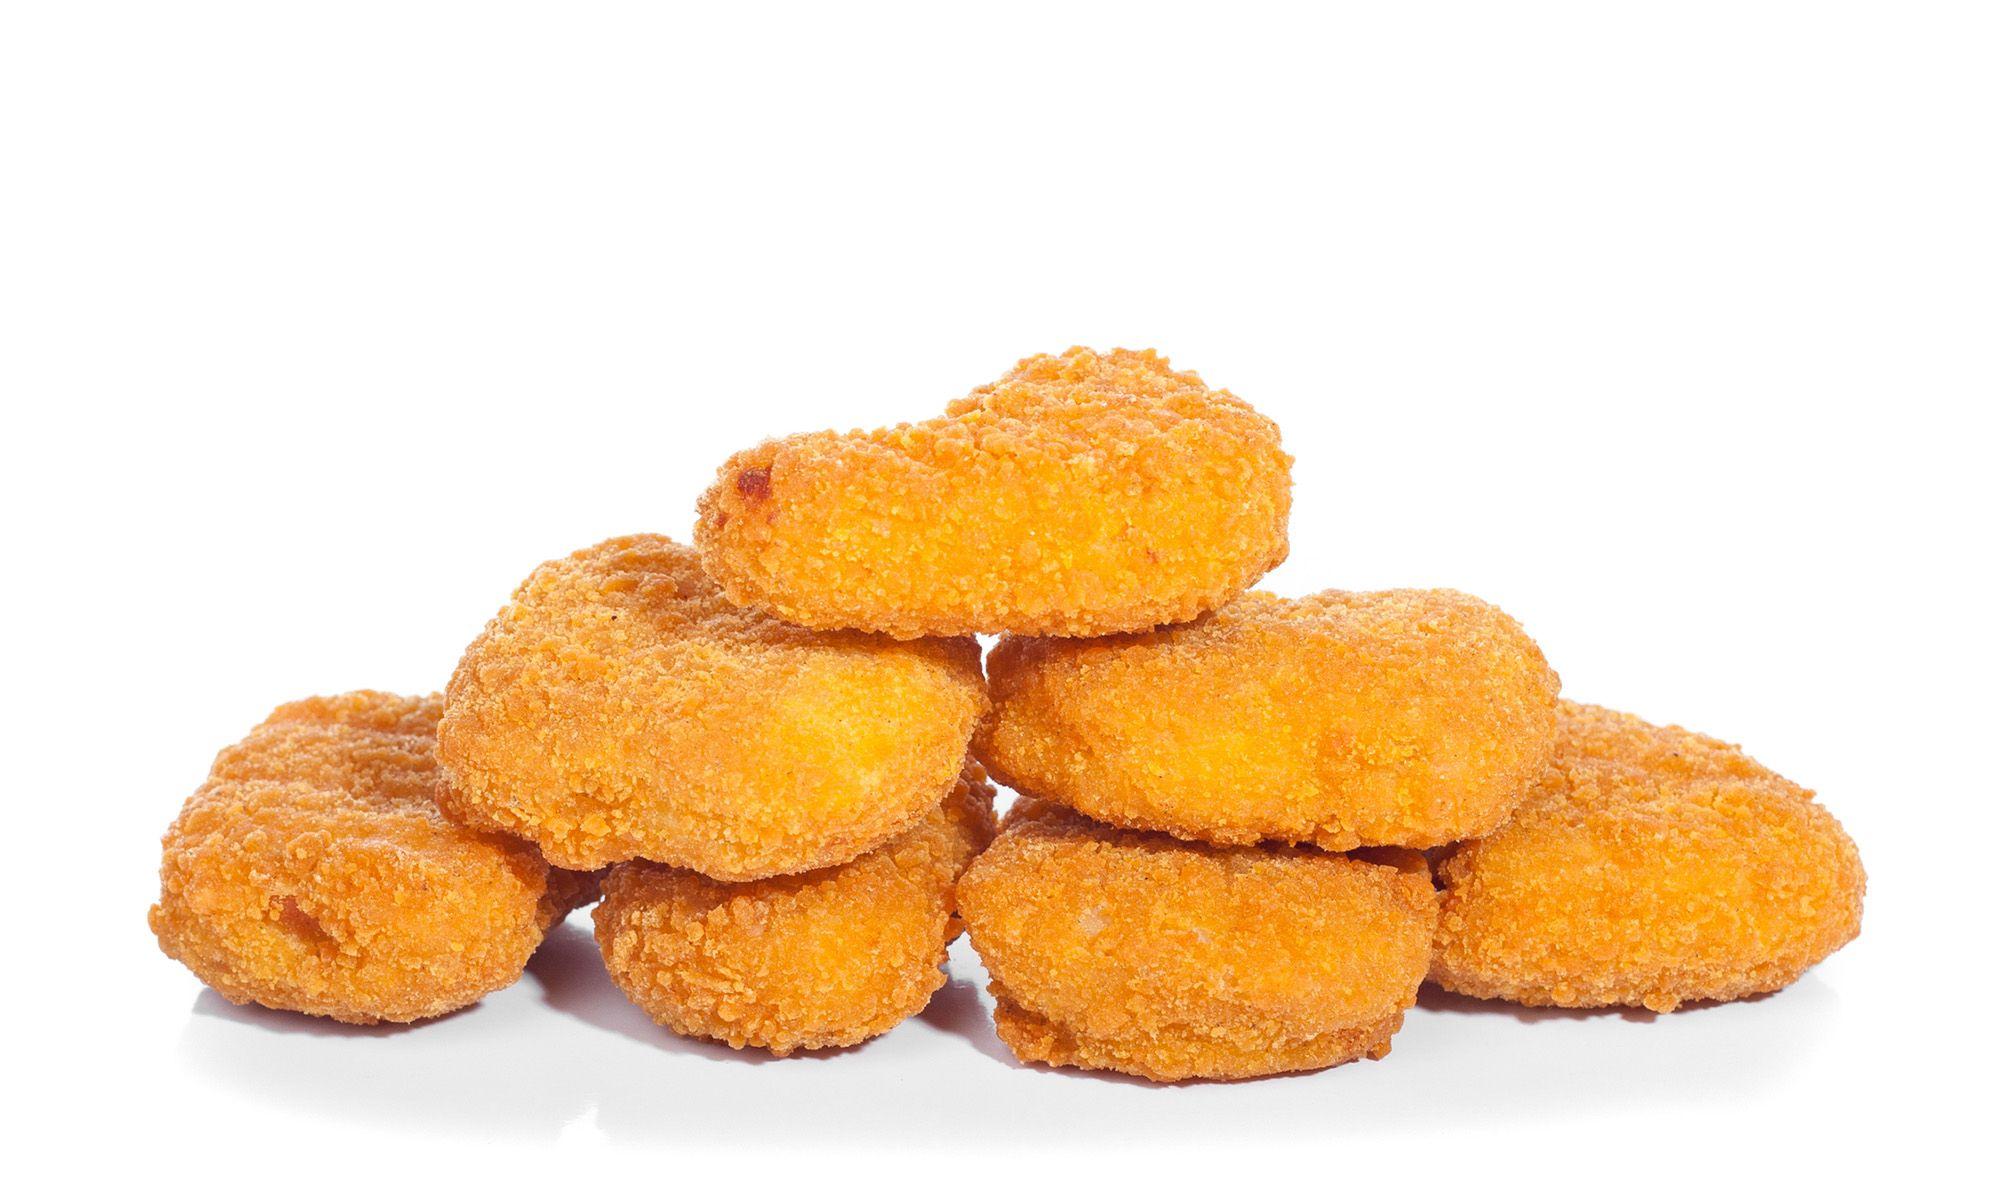 Perdue recalls chicken nuggets due to wood contamination The